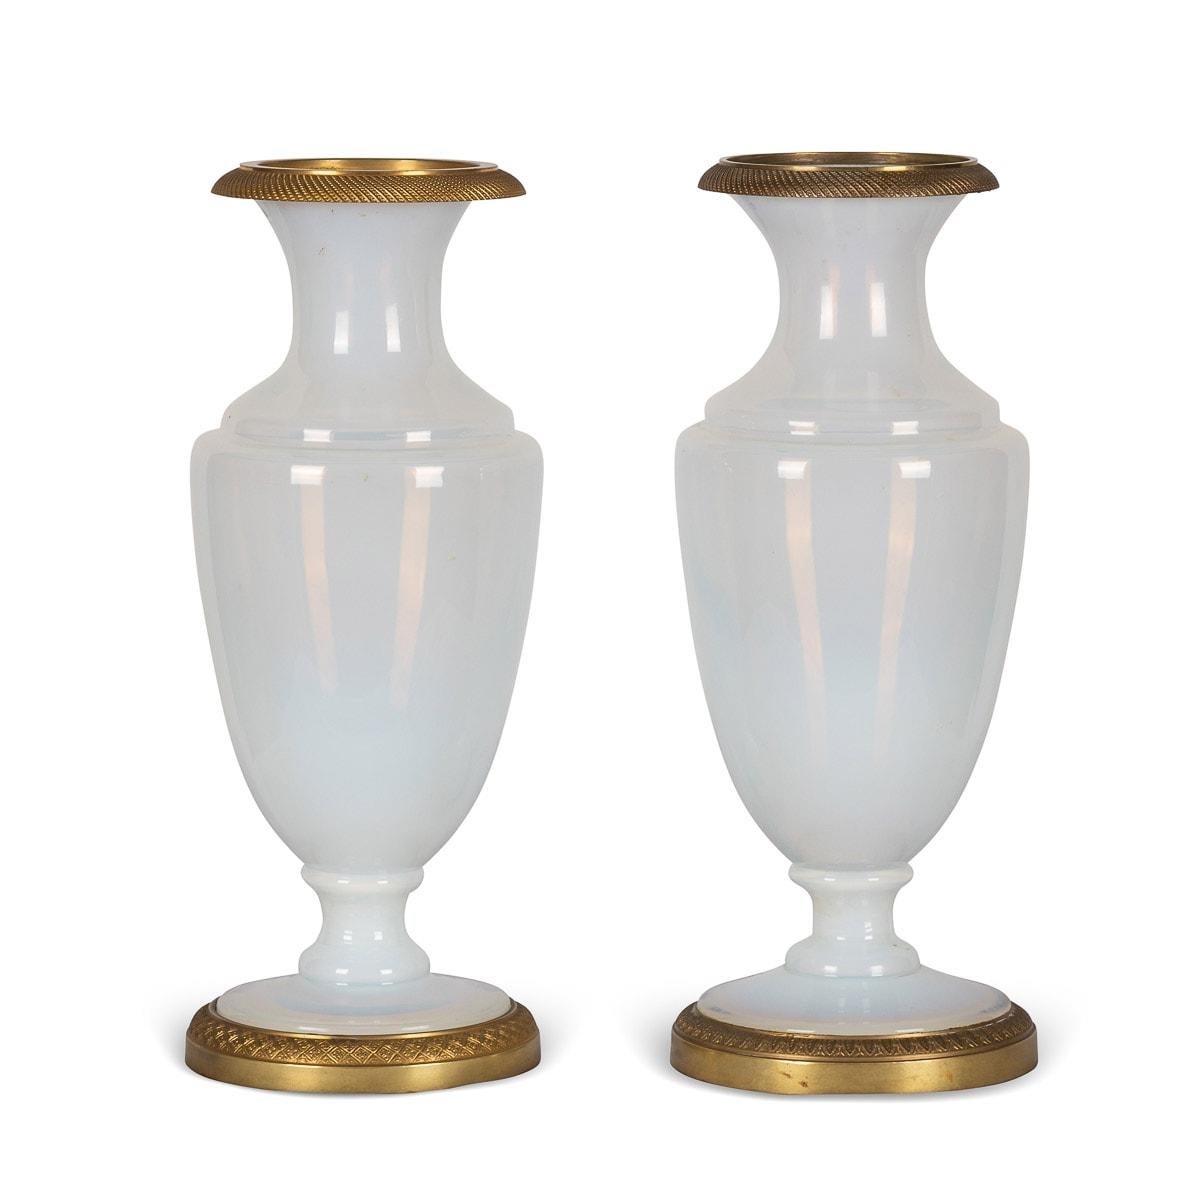 Opaline Glass 19th Century French Pair of Ormolu Mounted Opaline Vases, C.1820